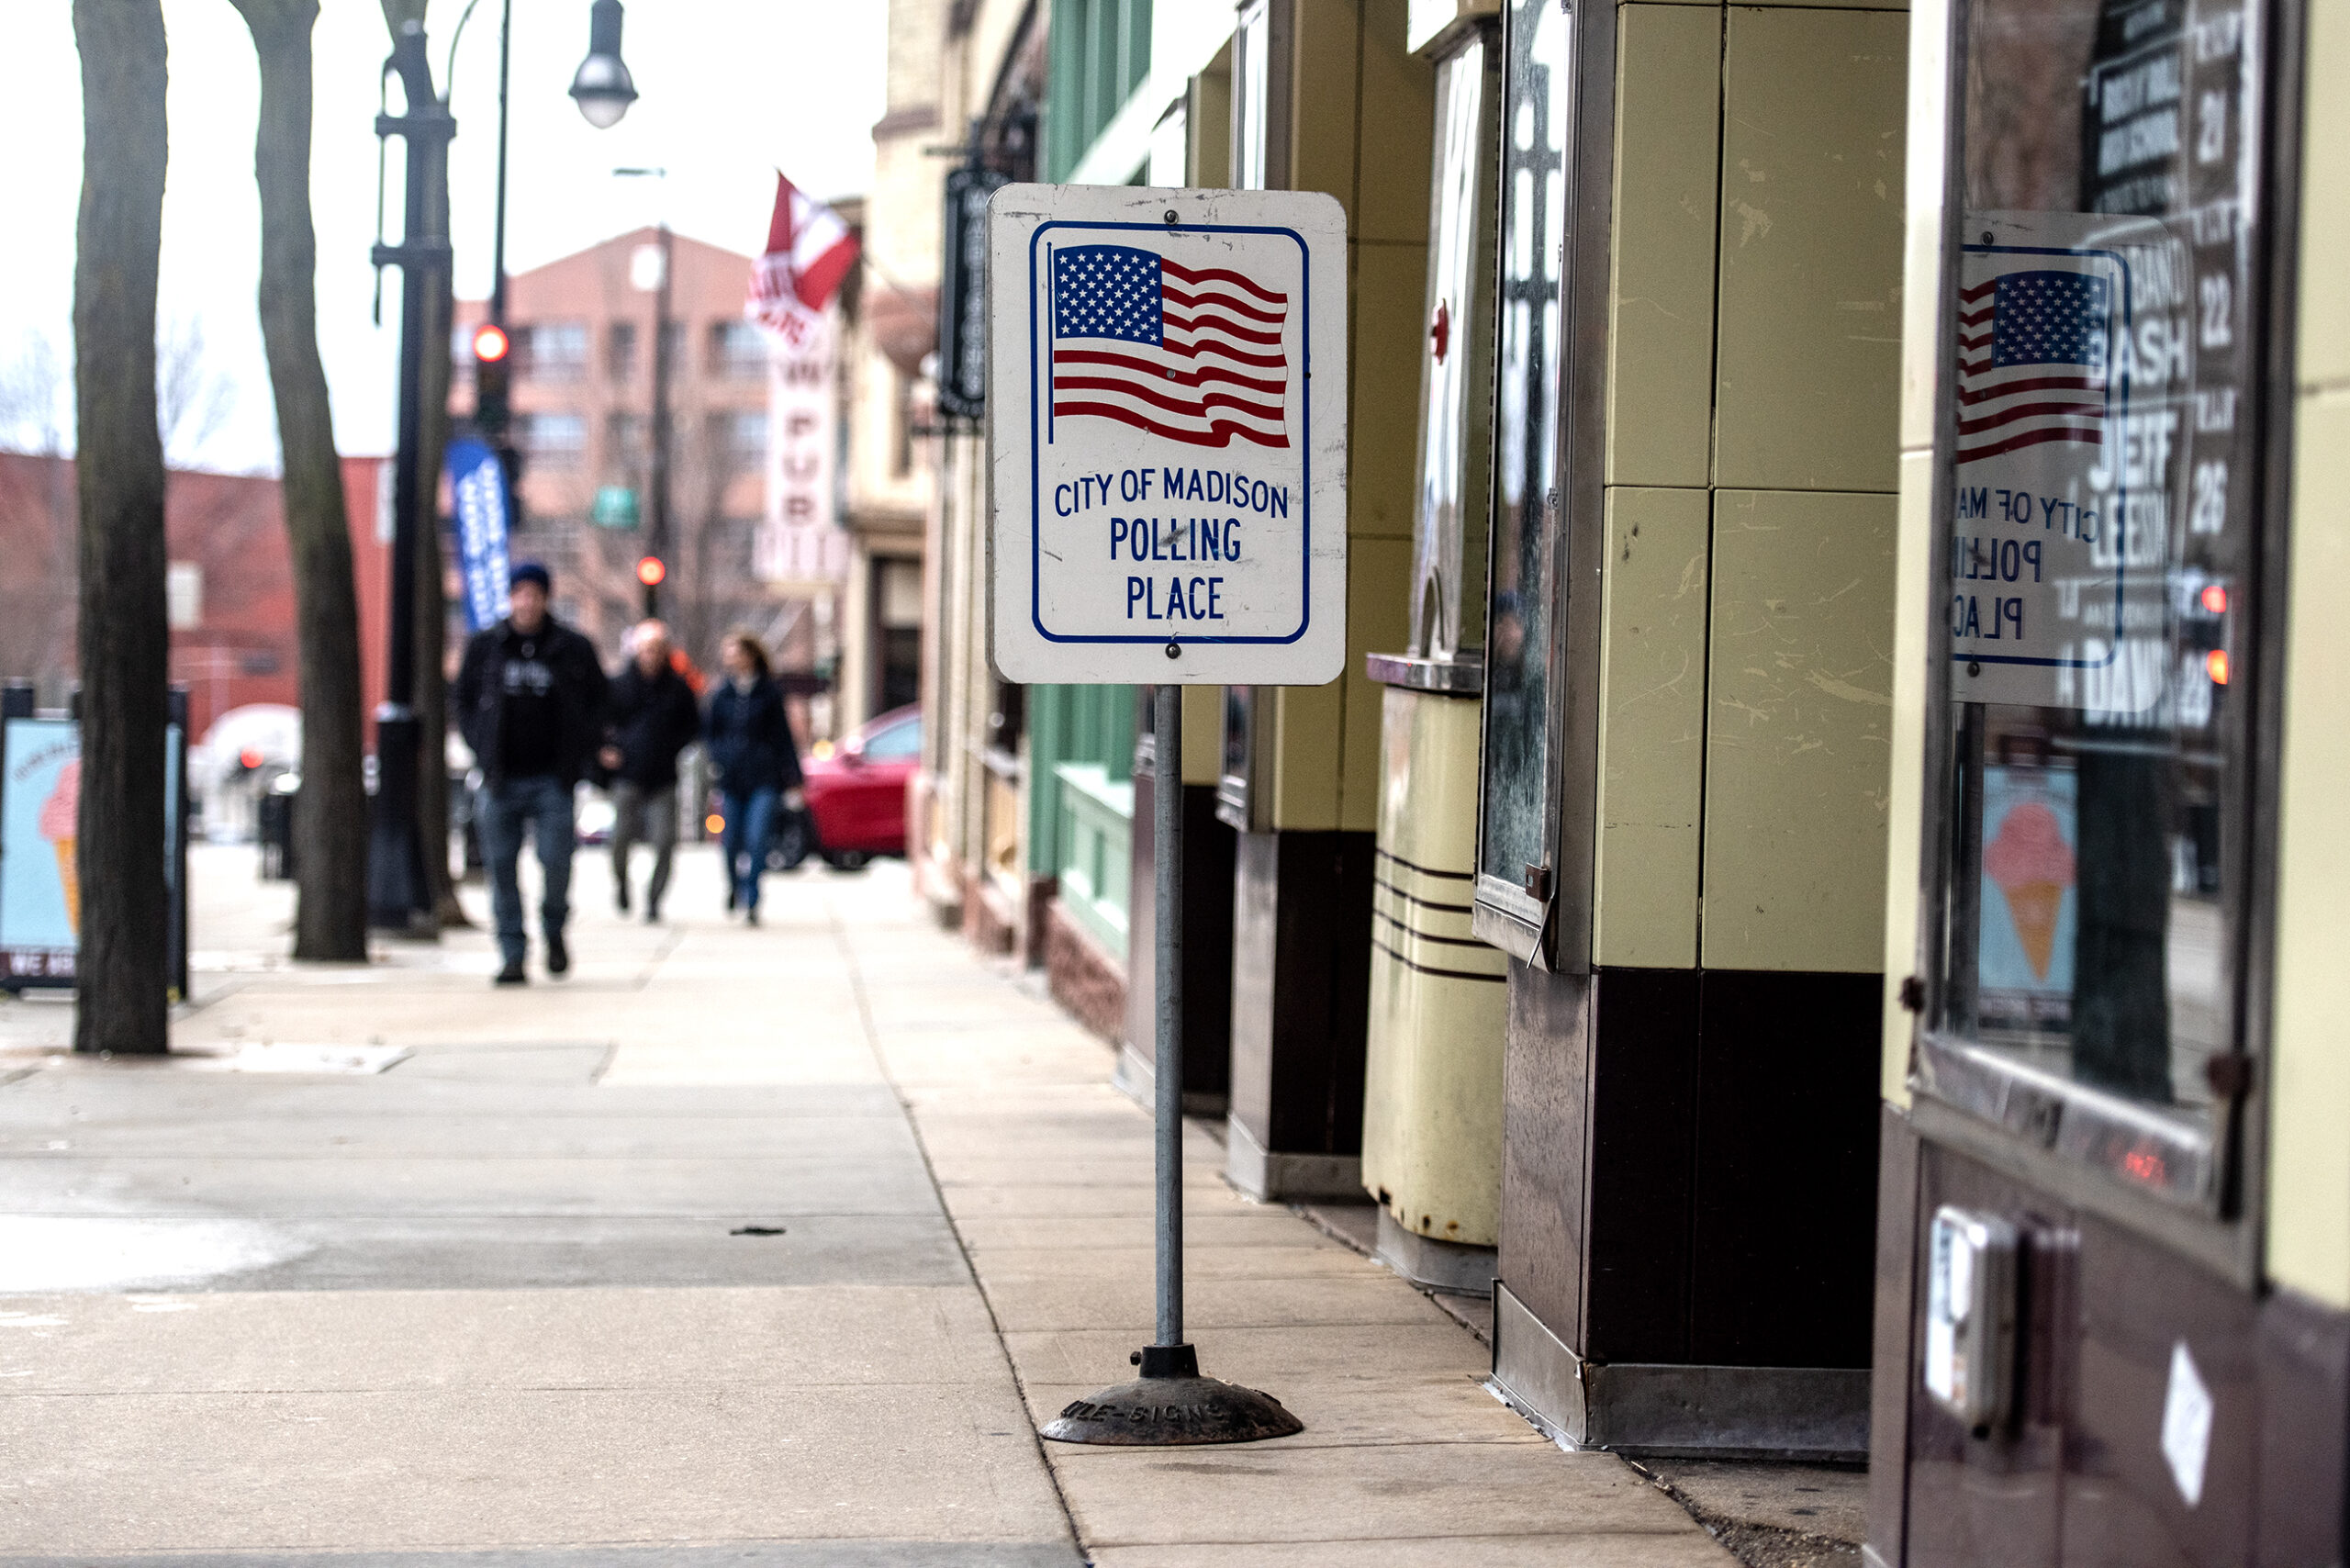 A sign on a sidewalk with a U.S. flag says "City of Madison Polling Place."